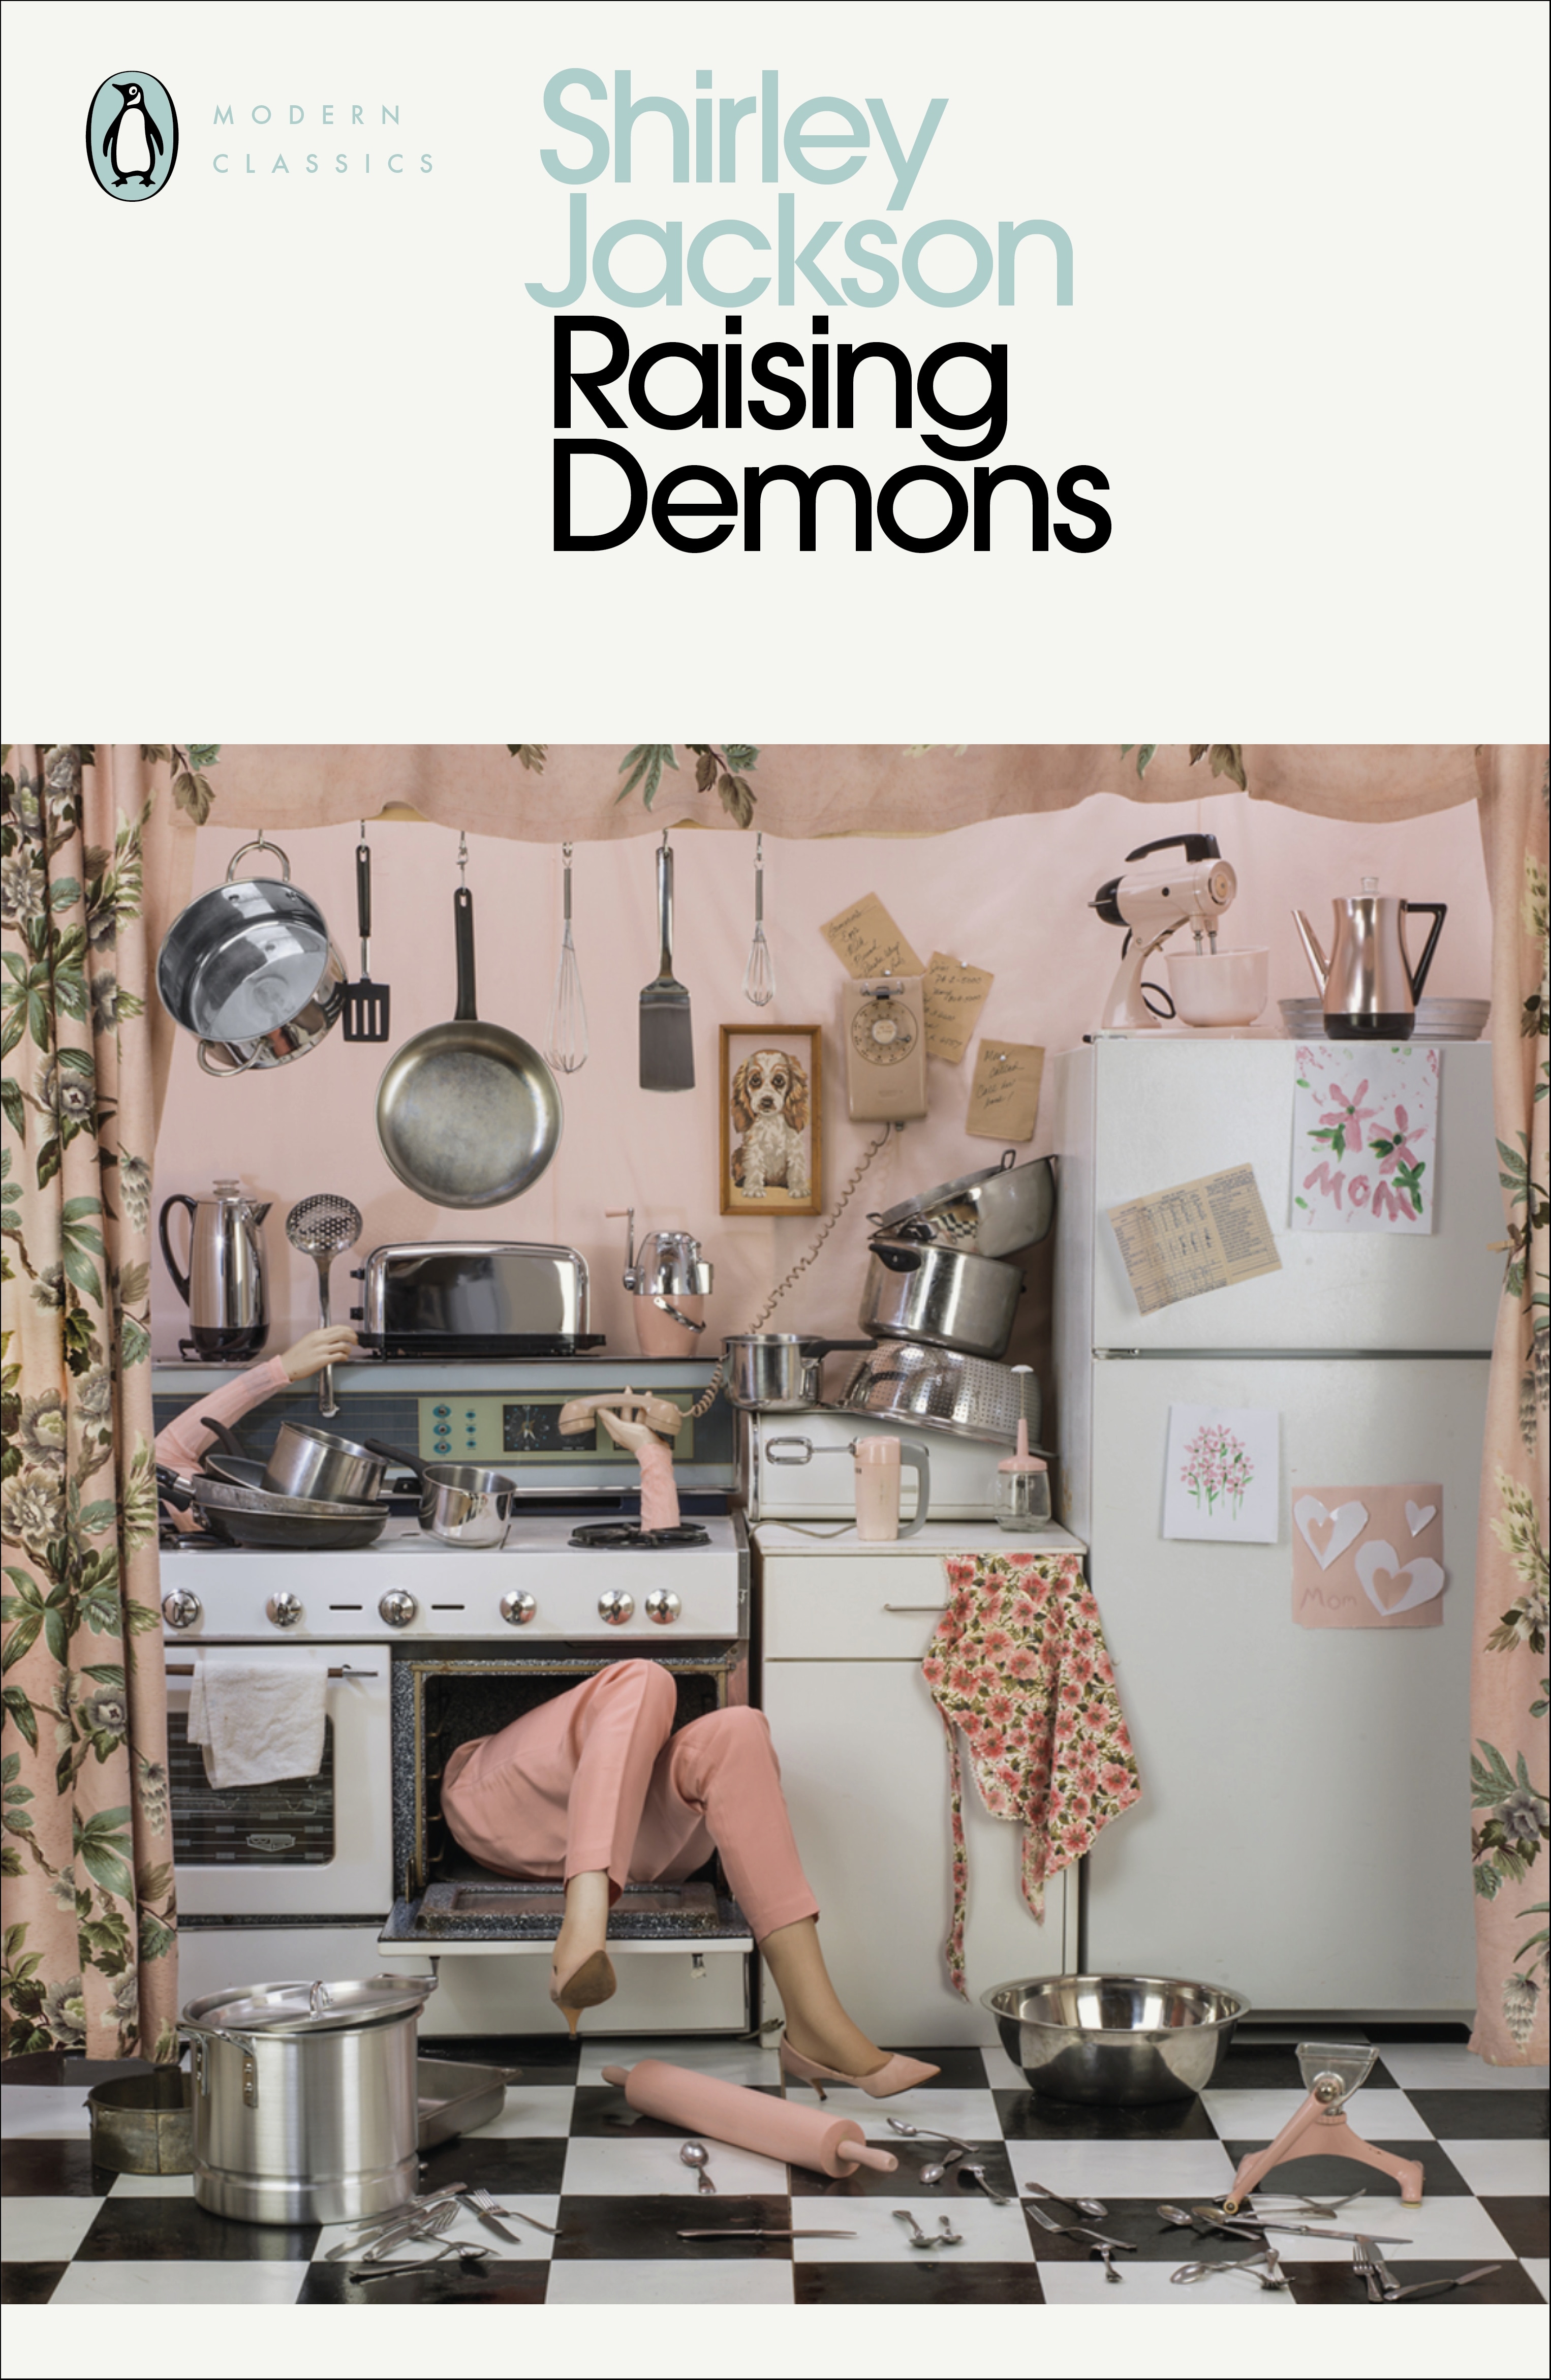 Book “Raising Demons” by Shirley Jackson — March 4, 2021